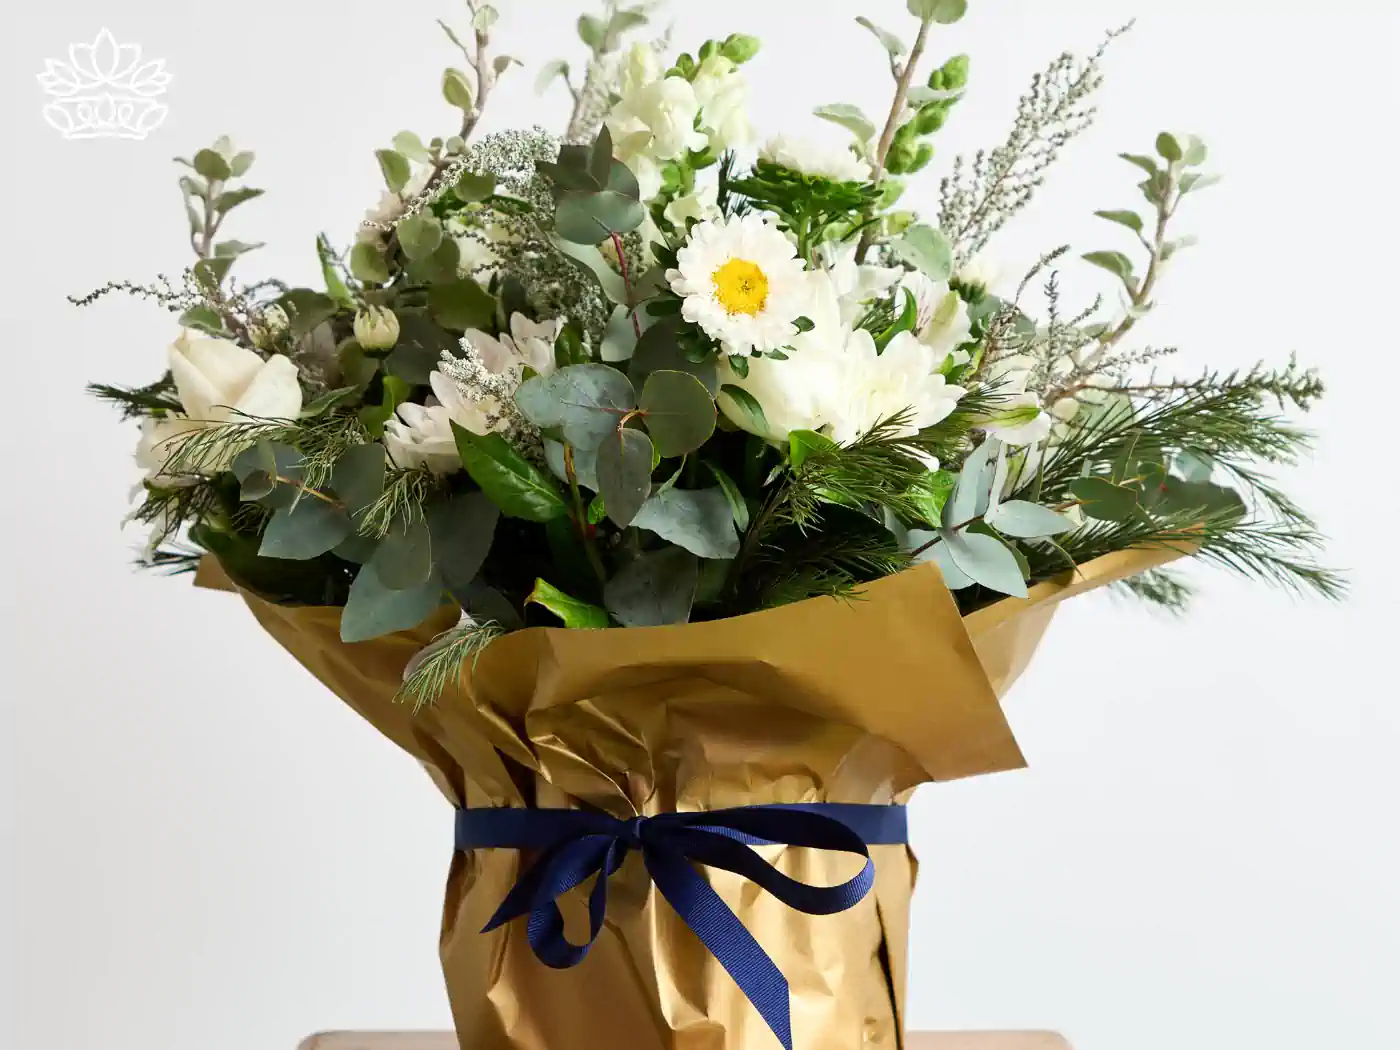 Chic and serene white and green floral arrangement wrapped in golden paper with a blue ribbon, ideal for a front desk setting, businesses reception area, creating a welcoming atmosphere.